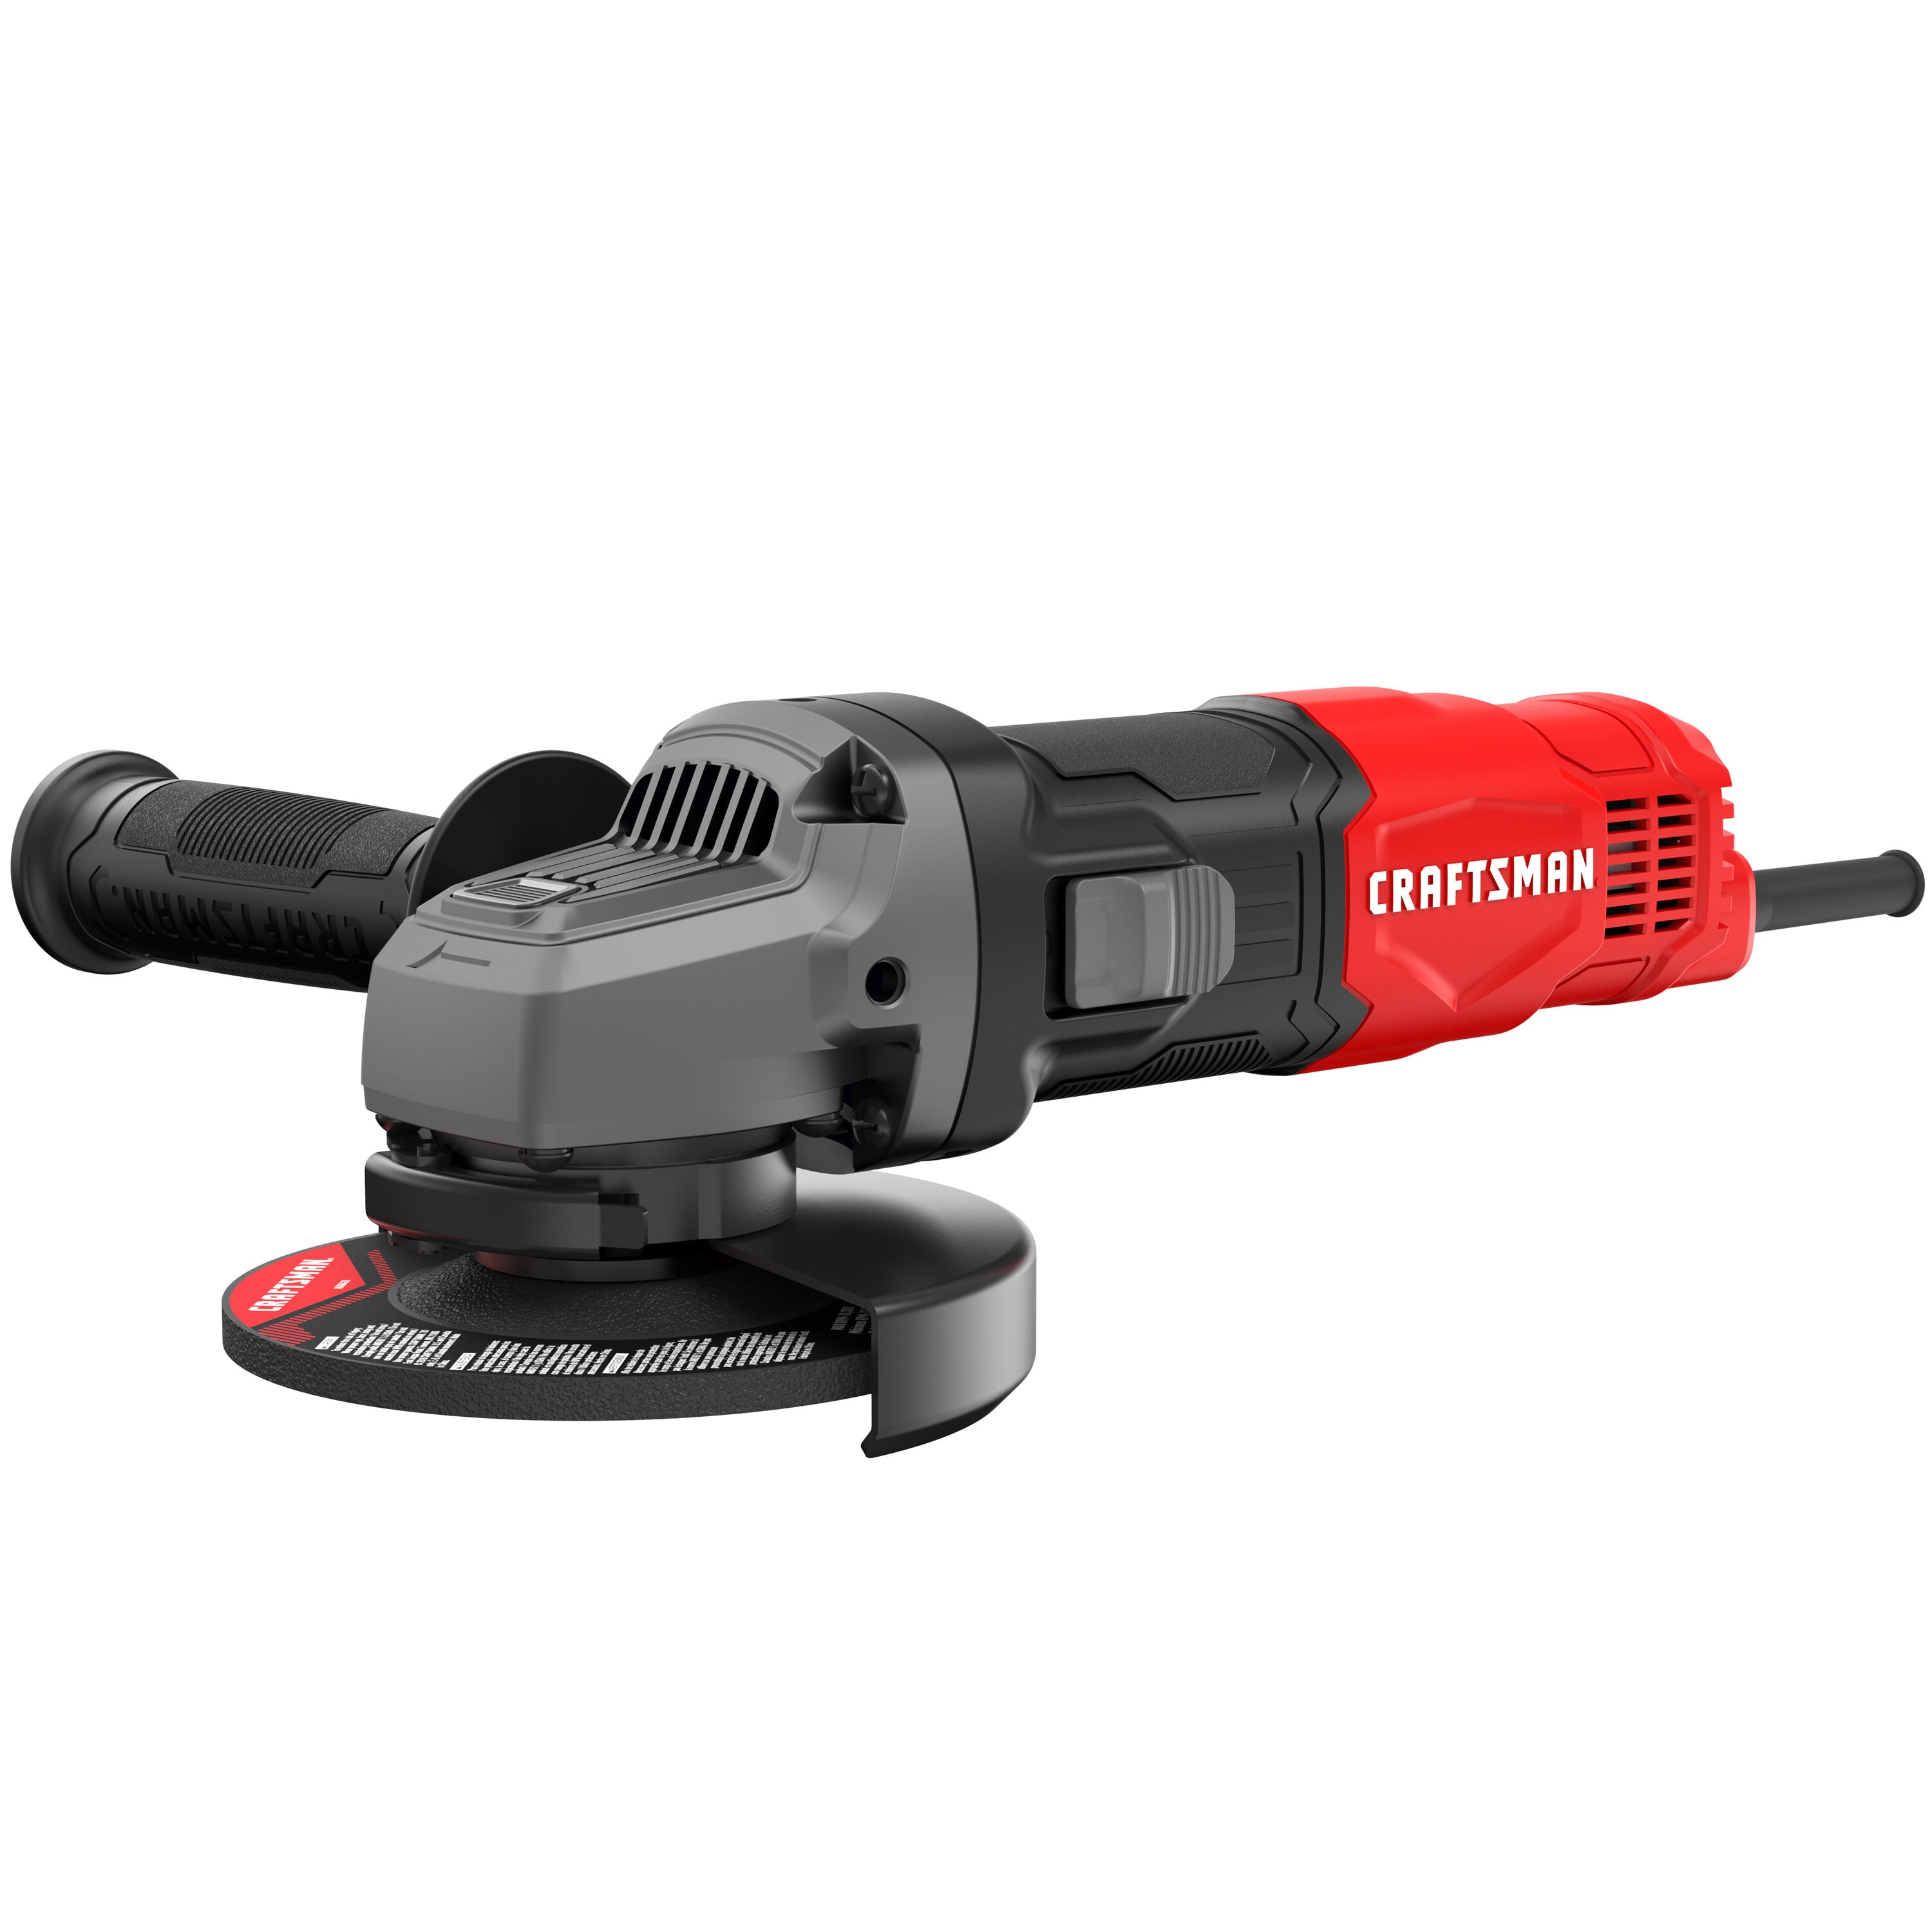 CRAFTSMAN 4.5-in 7.5 Amps Trigger Switch Corded Angle Grinder in